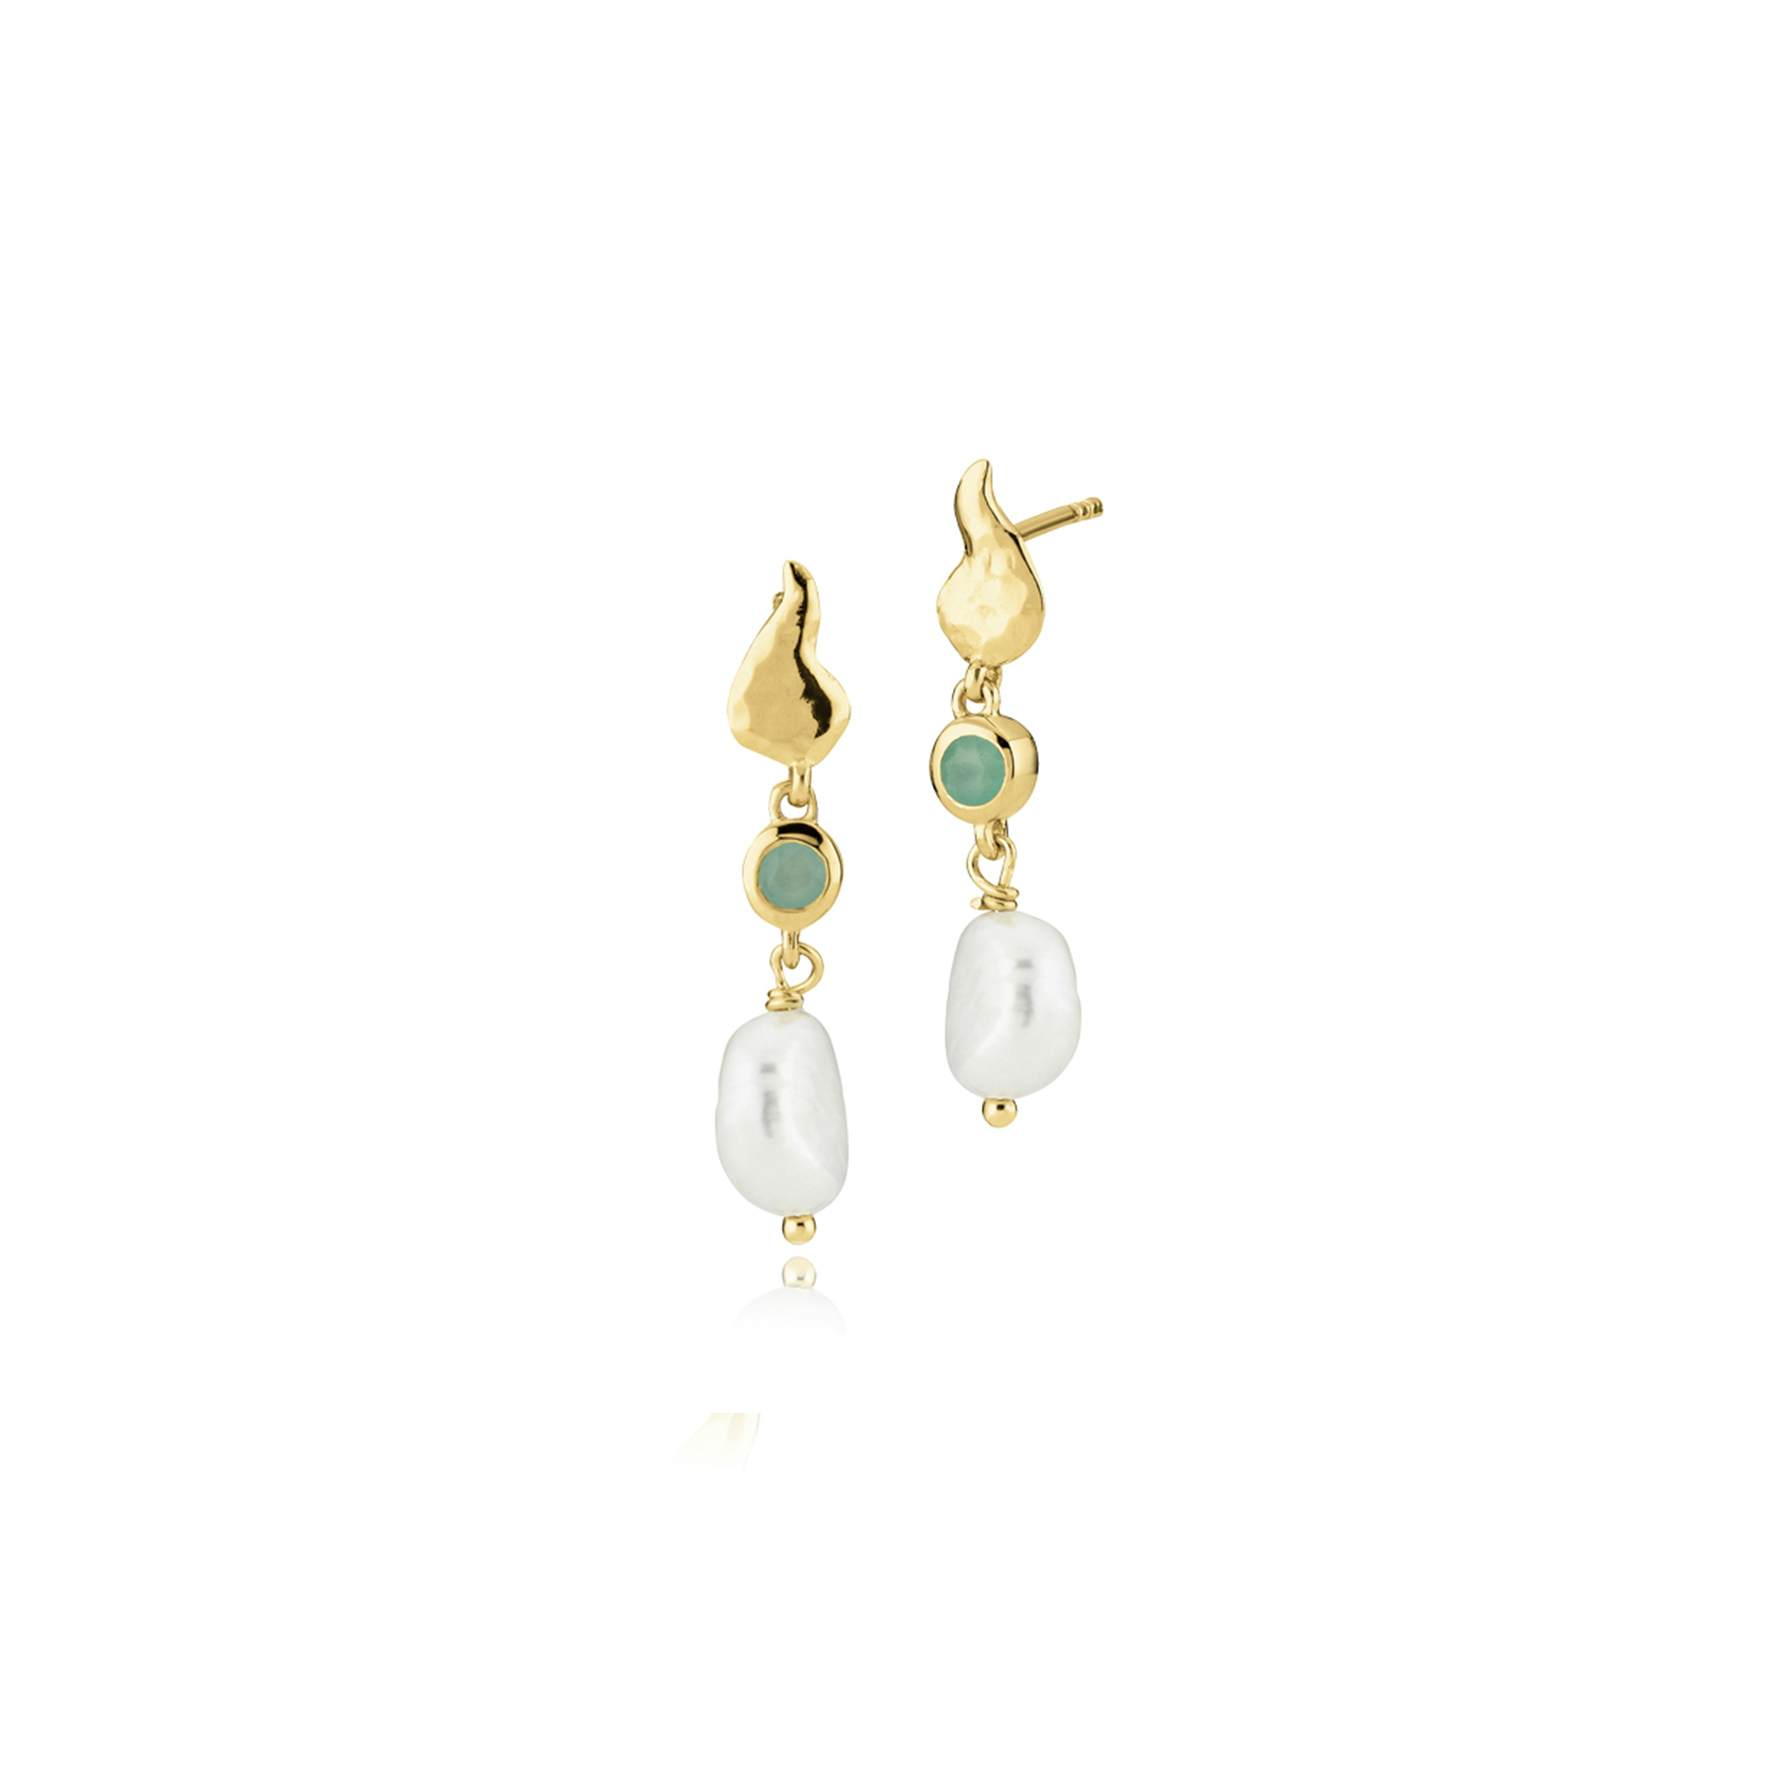 Leonora Earrings With Pearl And Green Stone fra Izabel Camille i Forgylt-Sølv Sterling 925